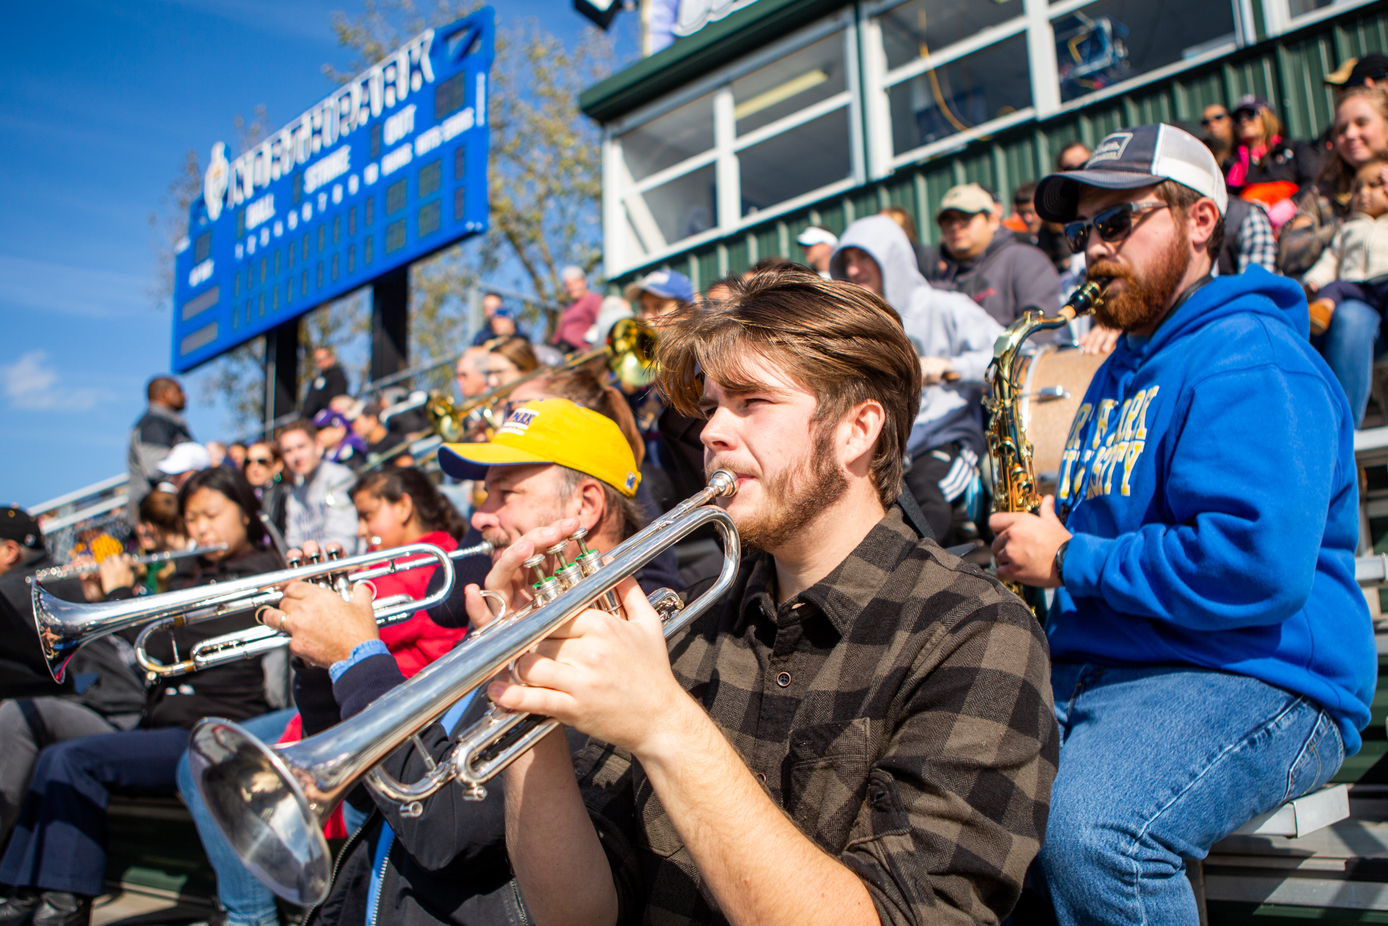 North Park University to Offer Scholarships for New Pep Band